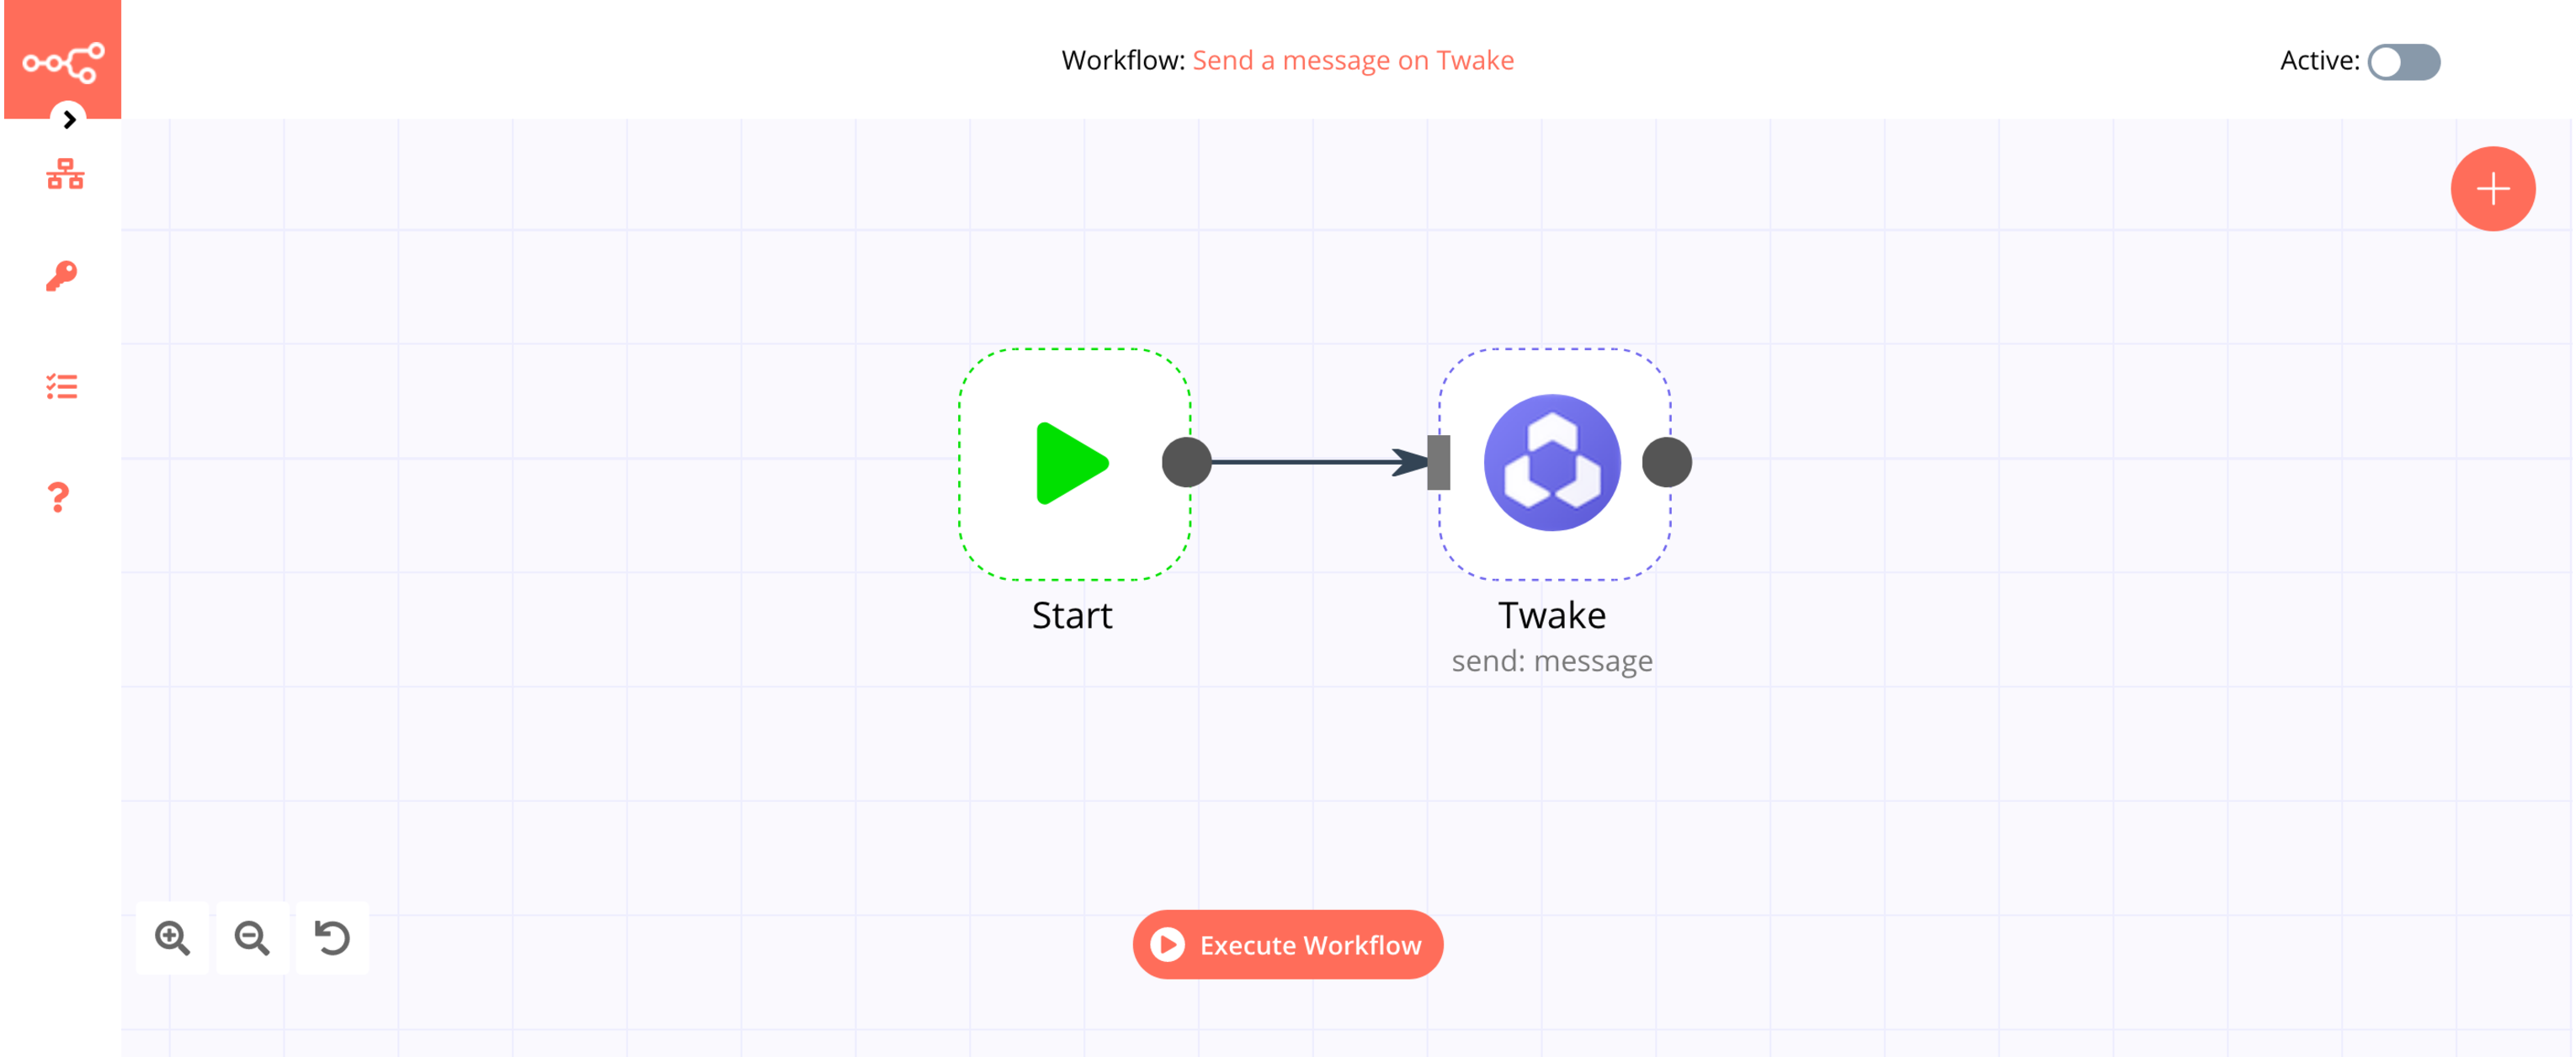 A workflow with the Twake node